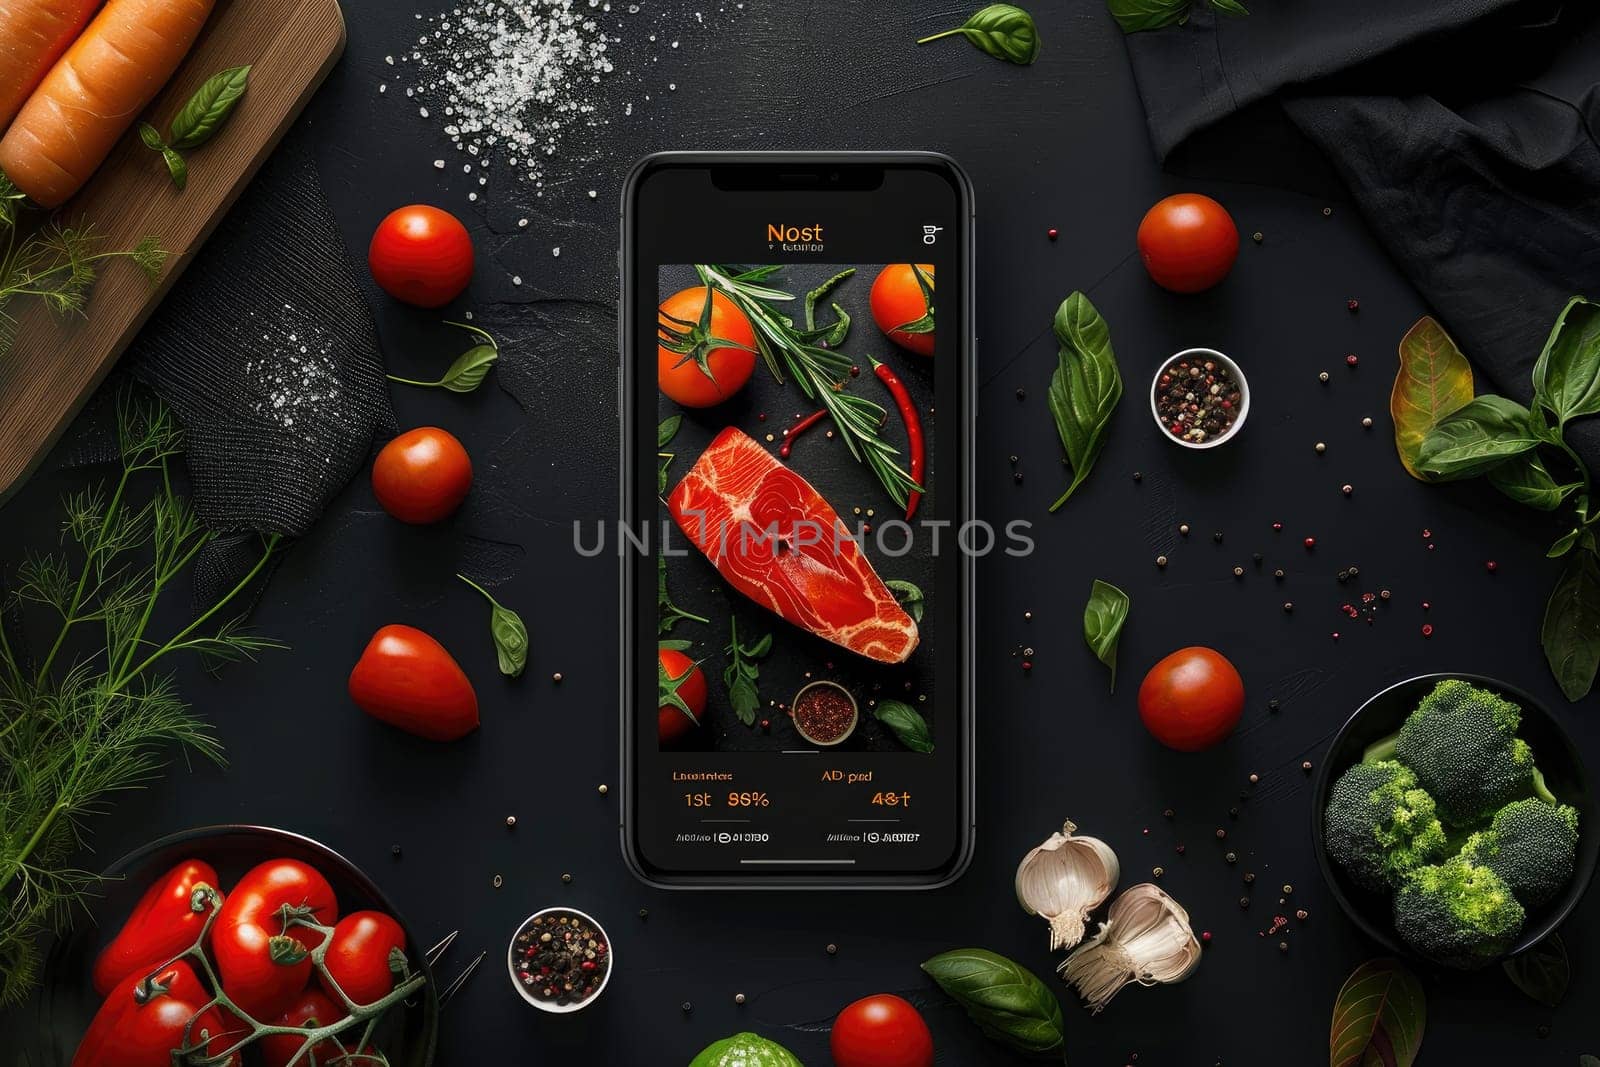 UI Application design for food school, dynaic, black, white, orange and red colors. by Chawagen